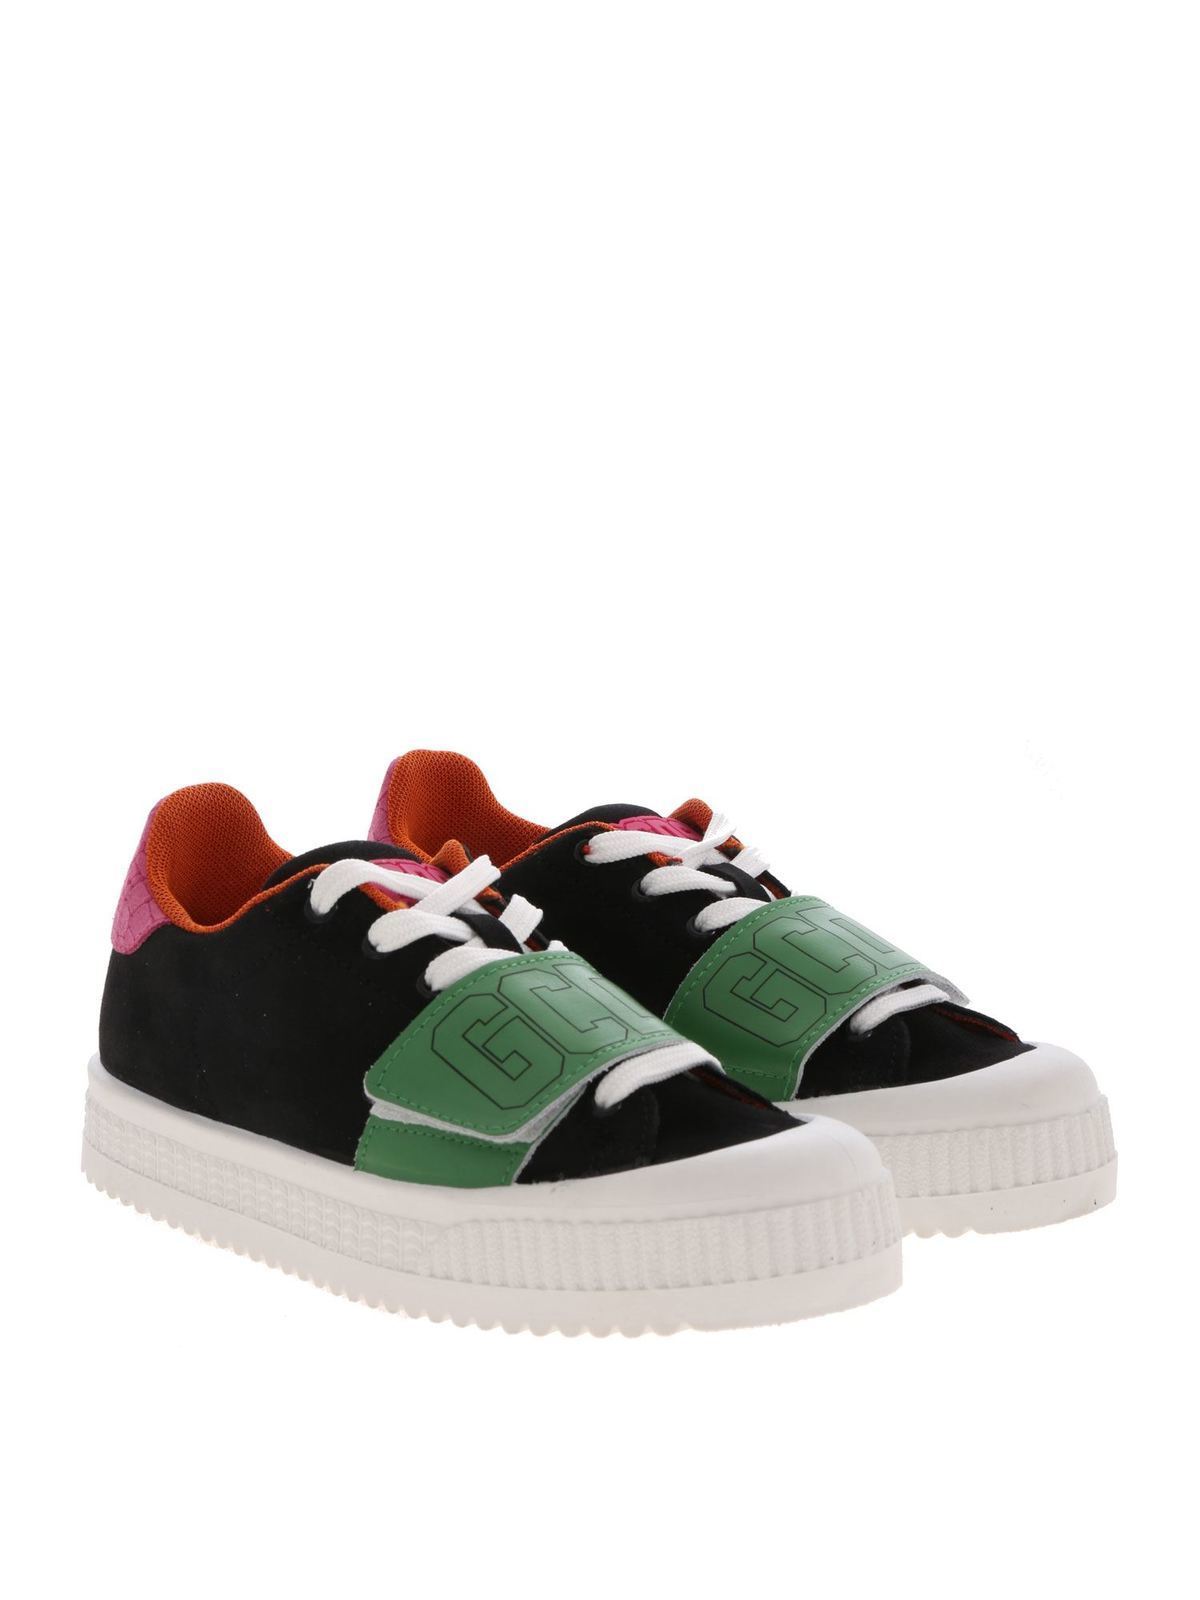 Gcds - Suede sneakers with velcro strap 